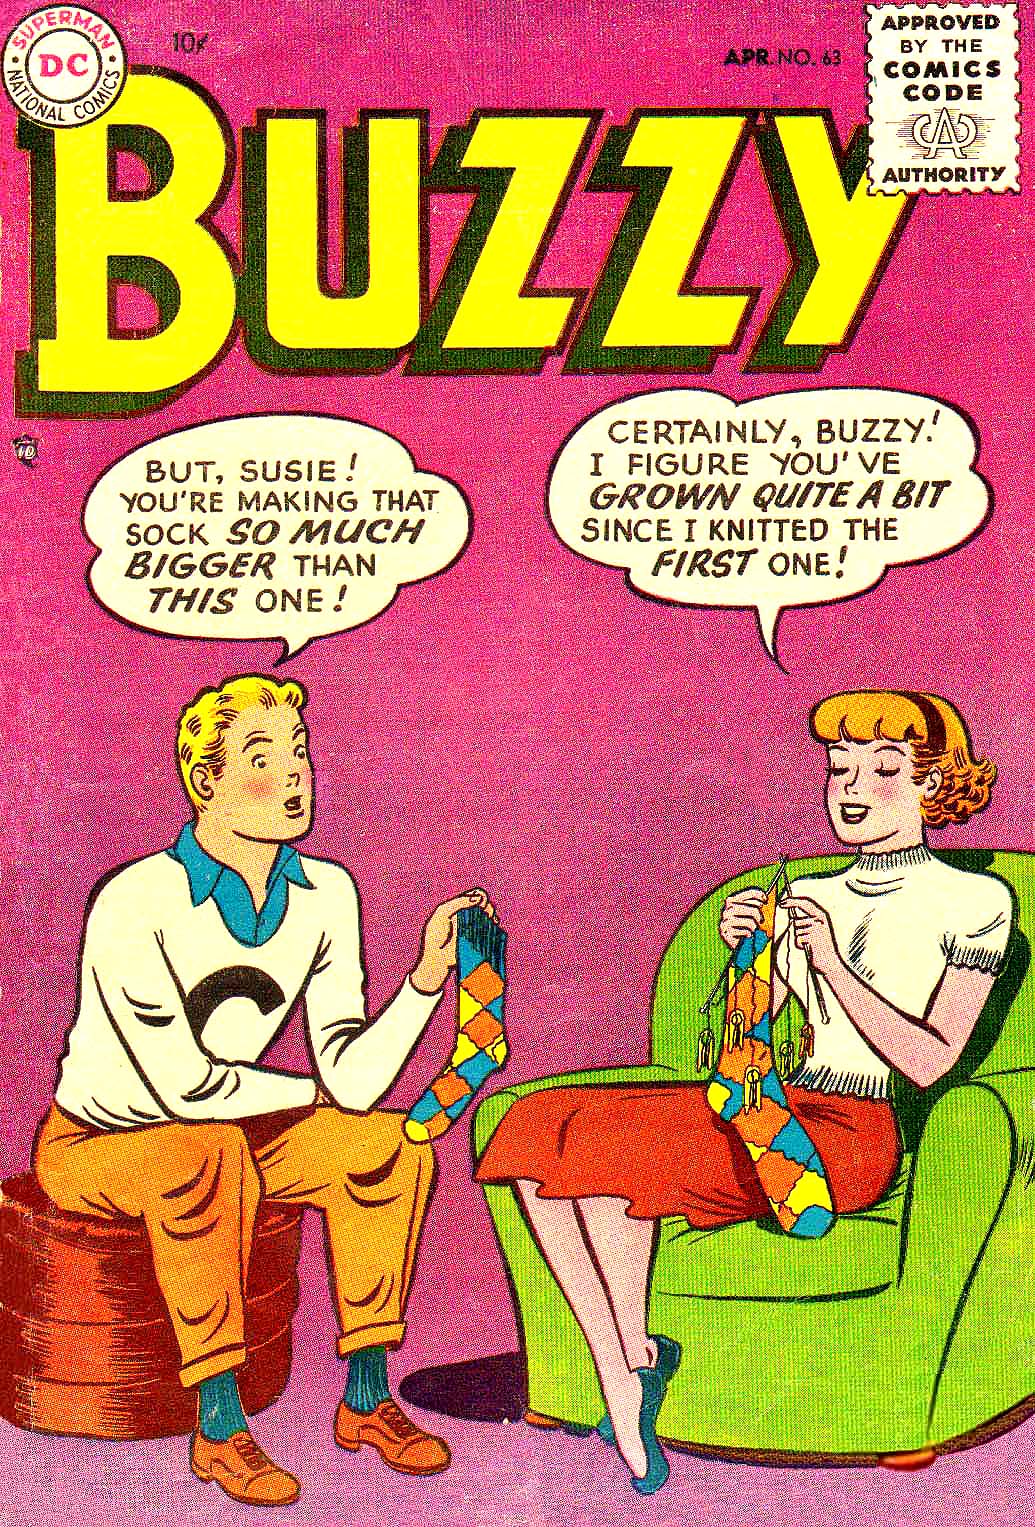 Read online Buzzy comic -  Issue #63 - 1